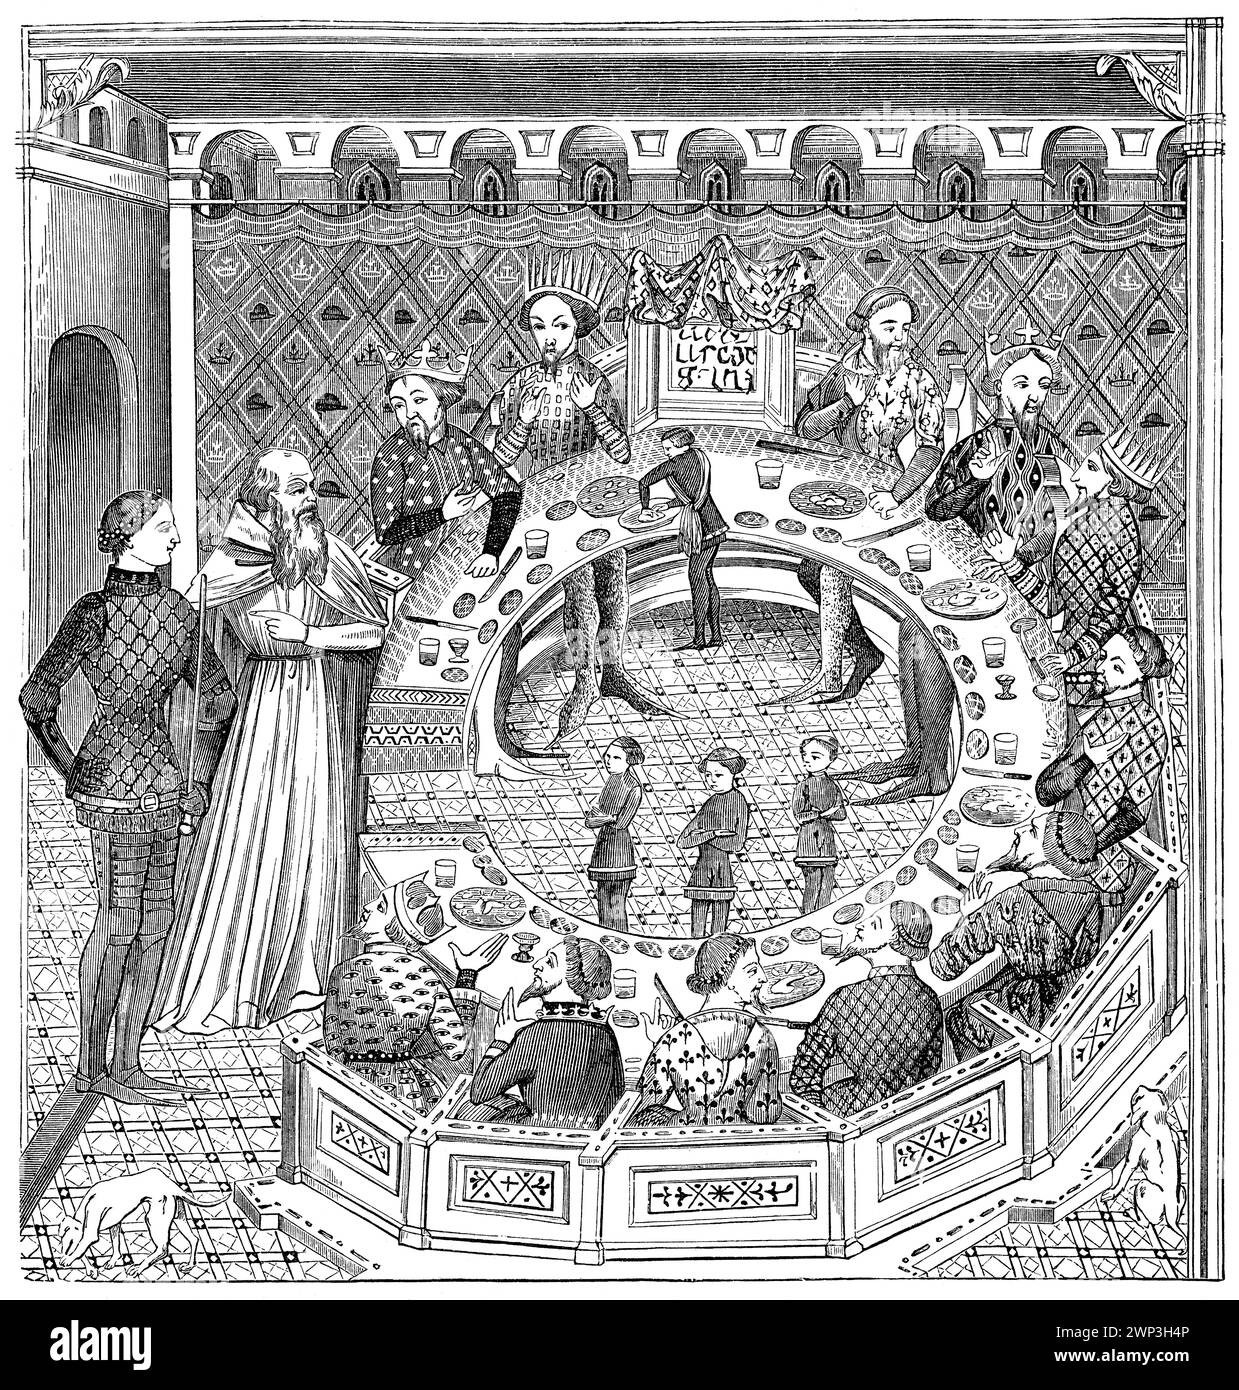 King Arthur and his Round Table, Arthurian legend Stock Photo